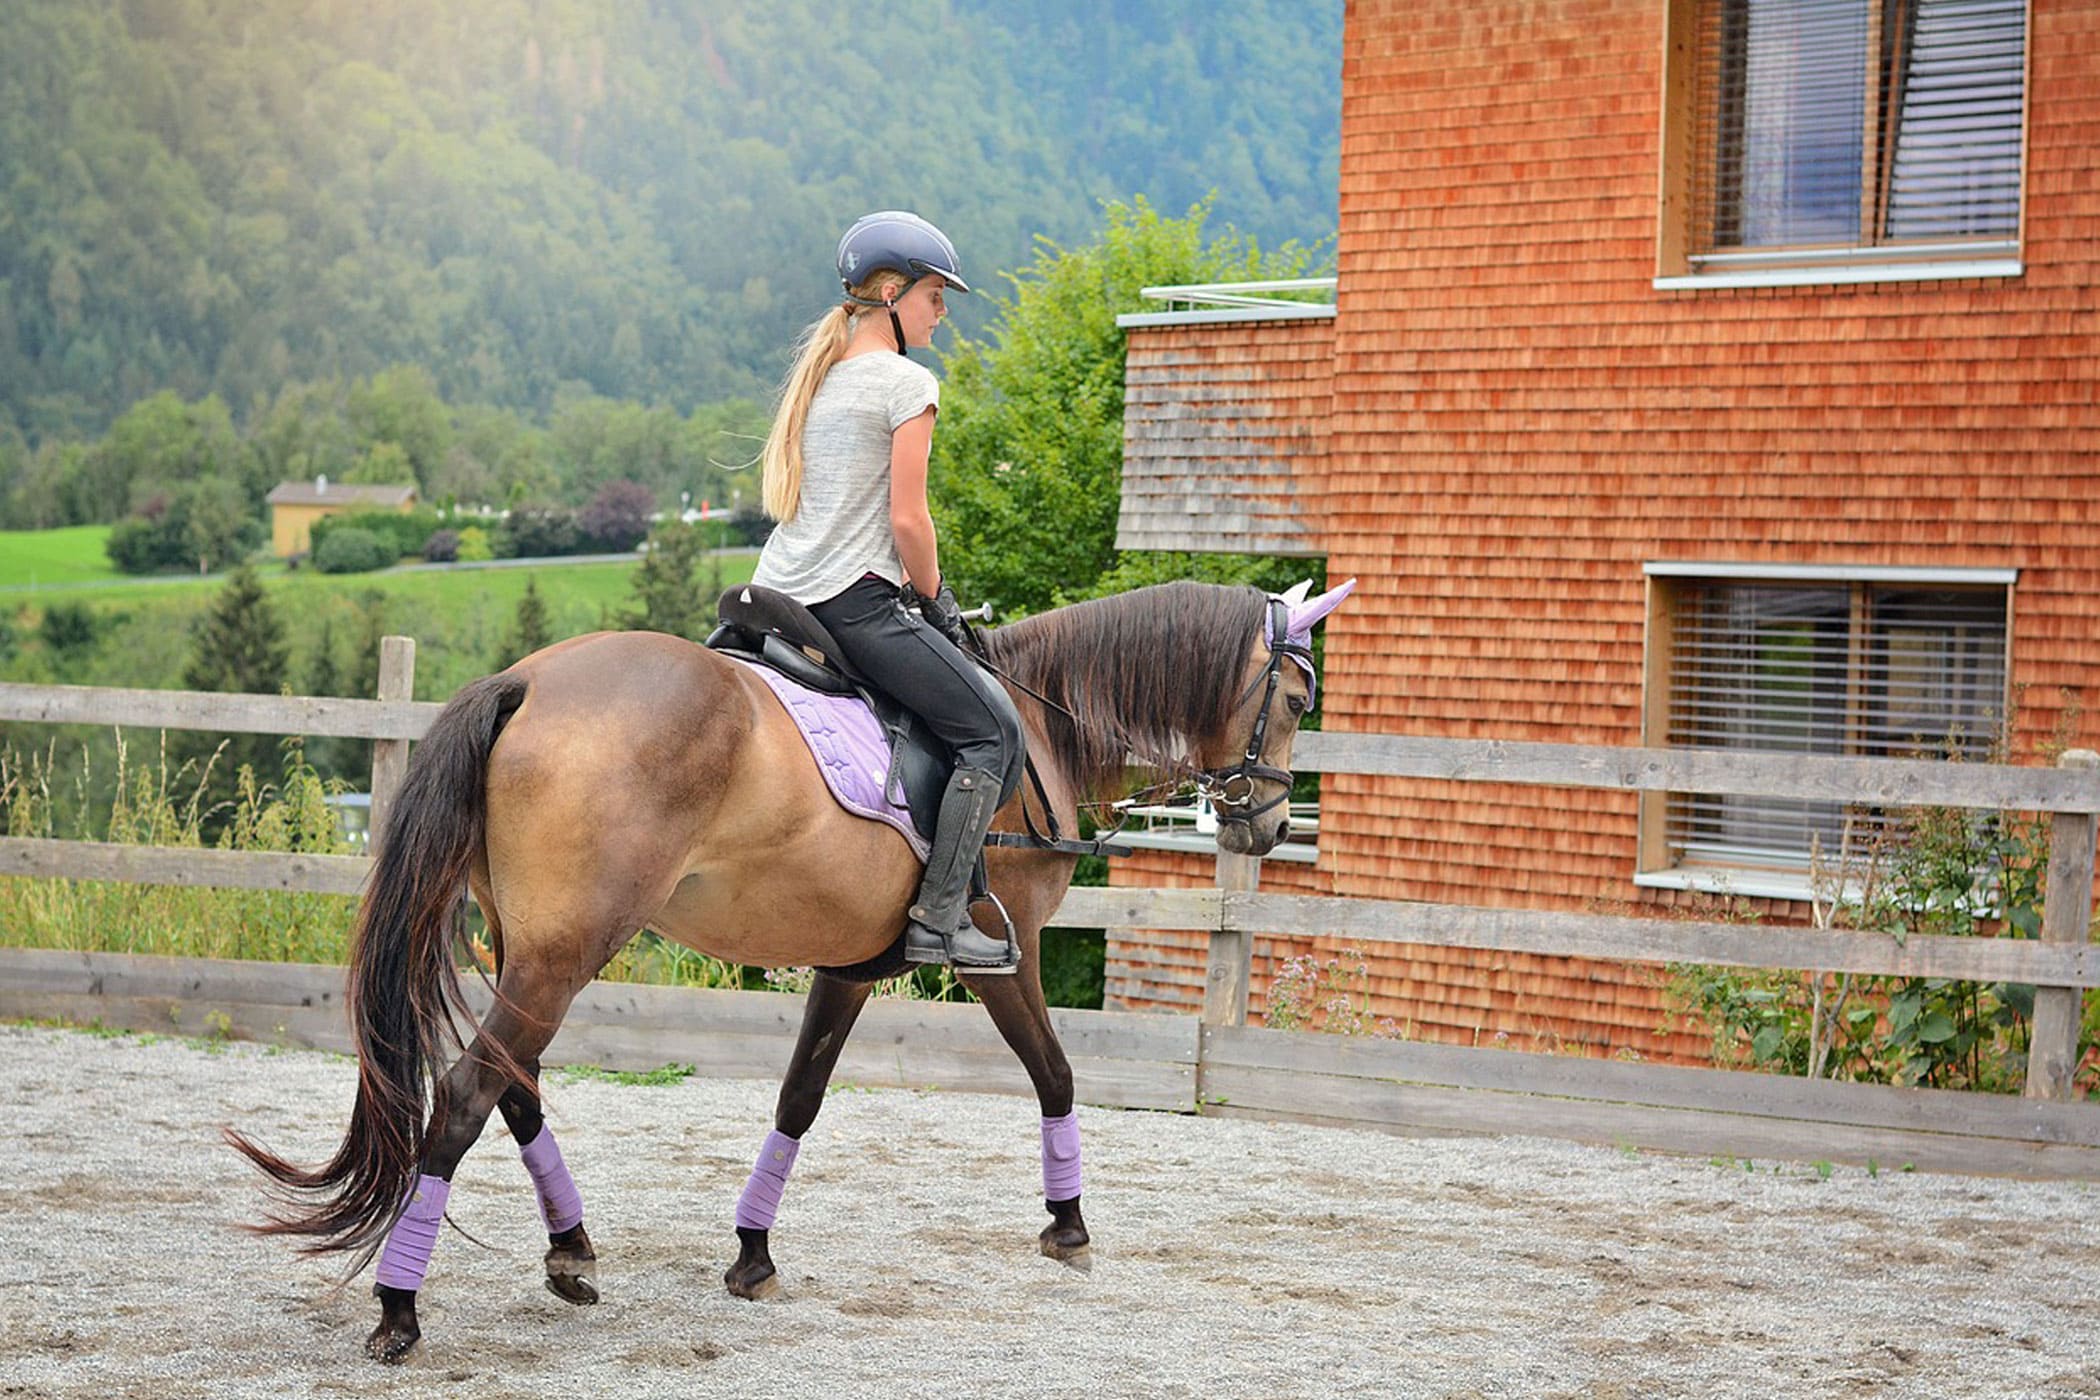 Tips for Overcoming Confirmation Bias in Equestrian Pursuits